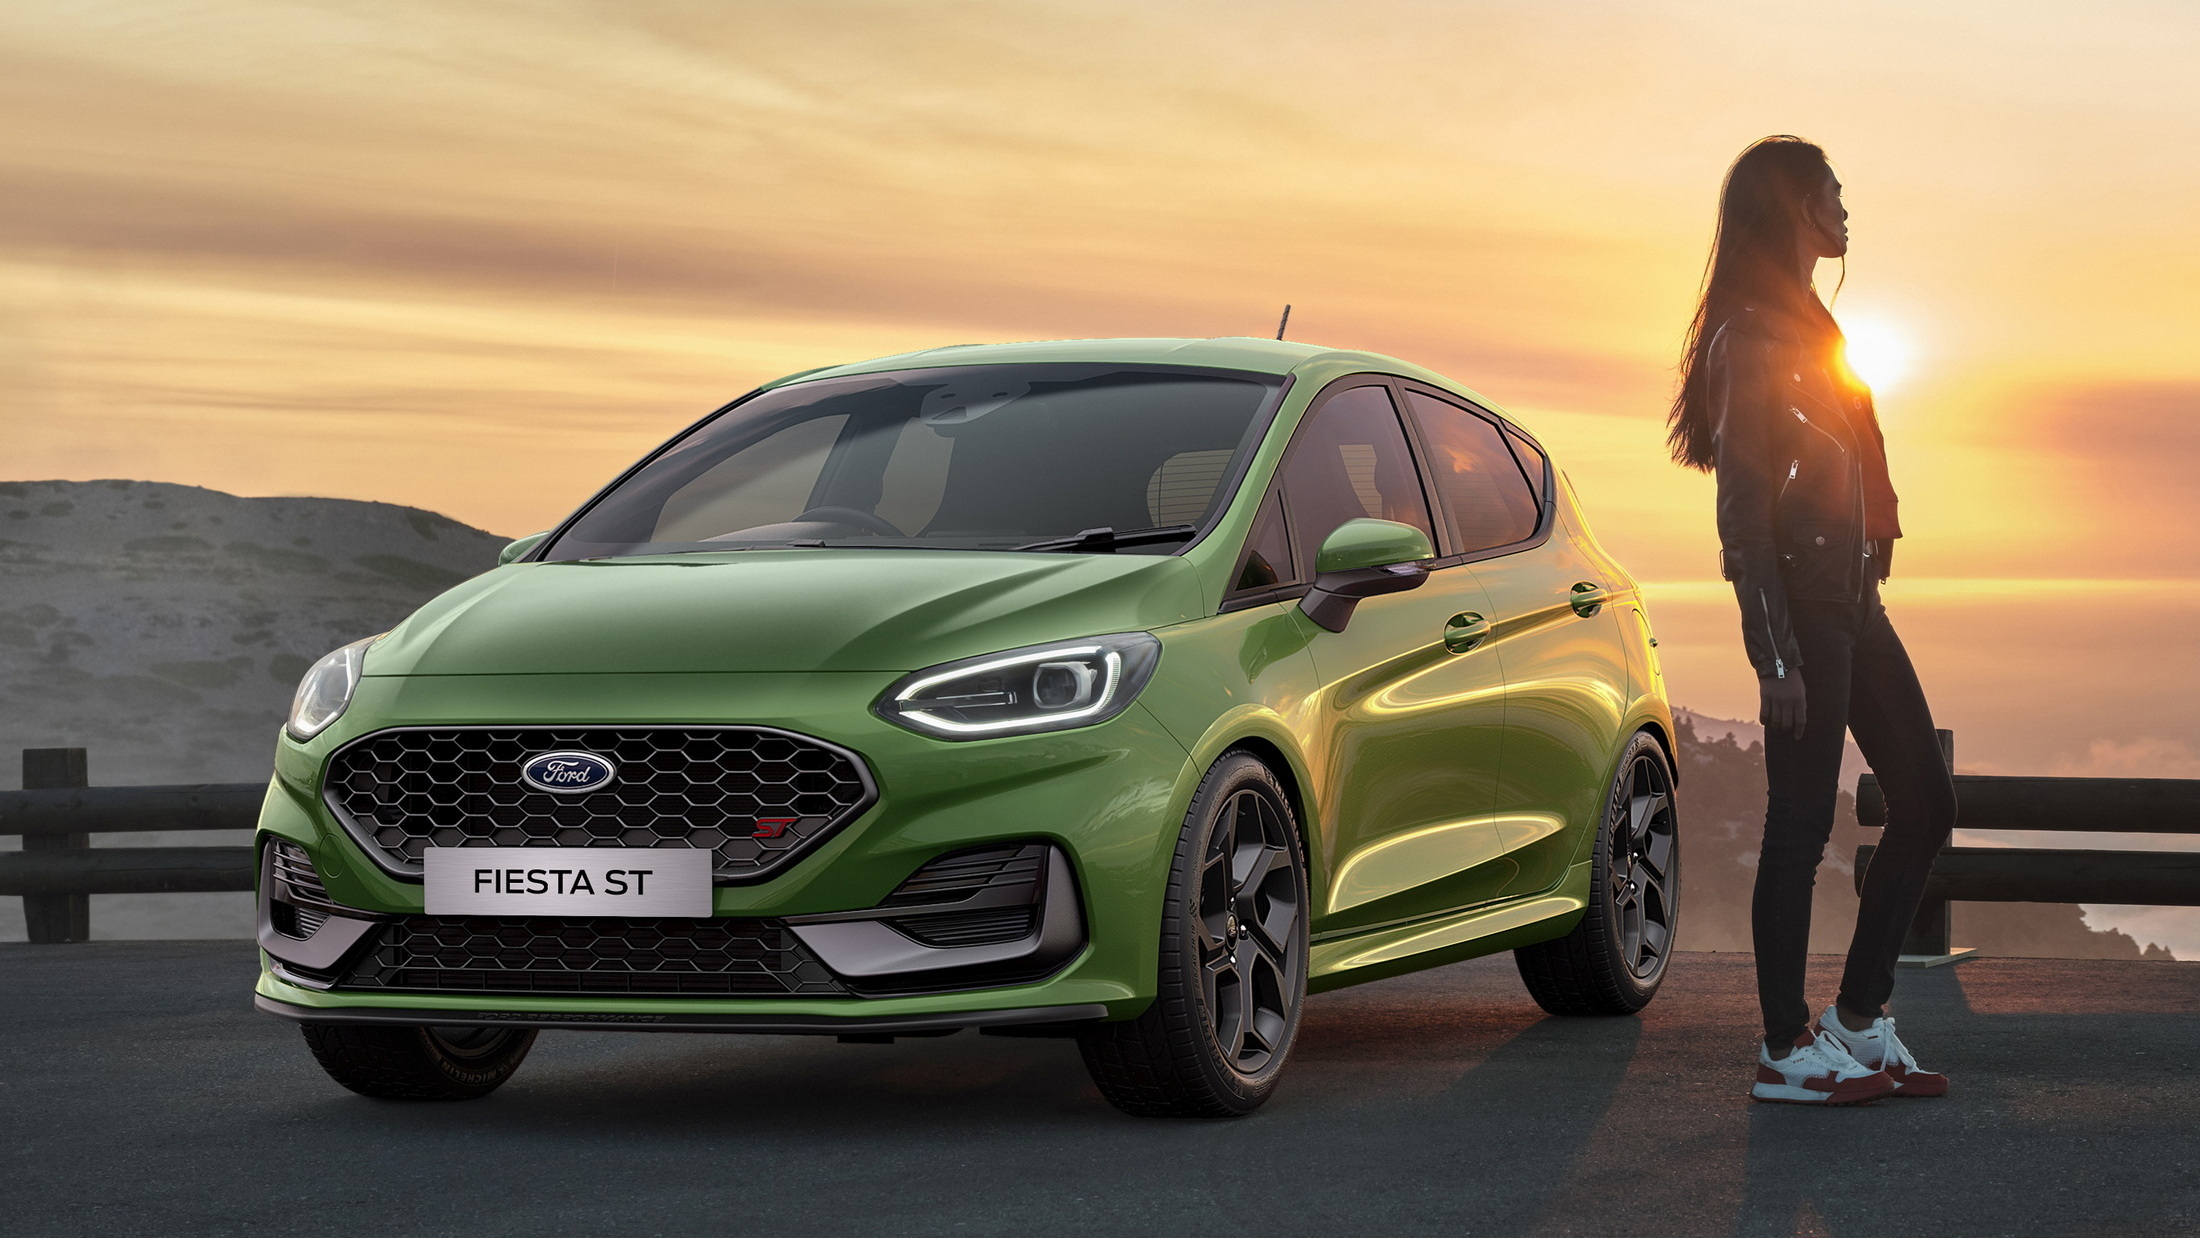 Ford Fiesta To Be Axed Globally As Carmaker Shifts Focus To EVs